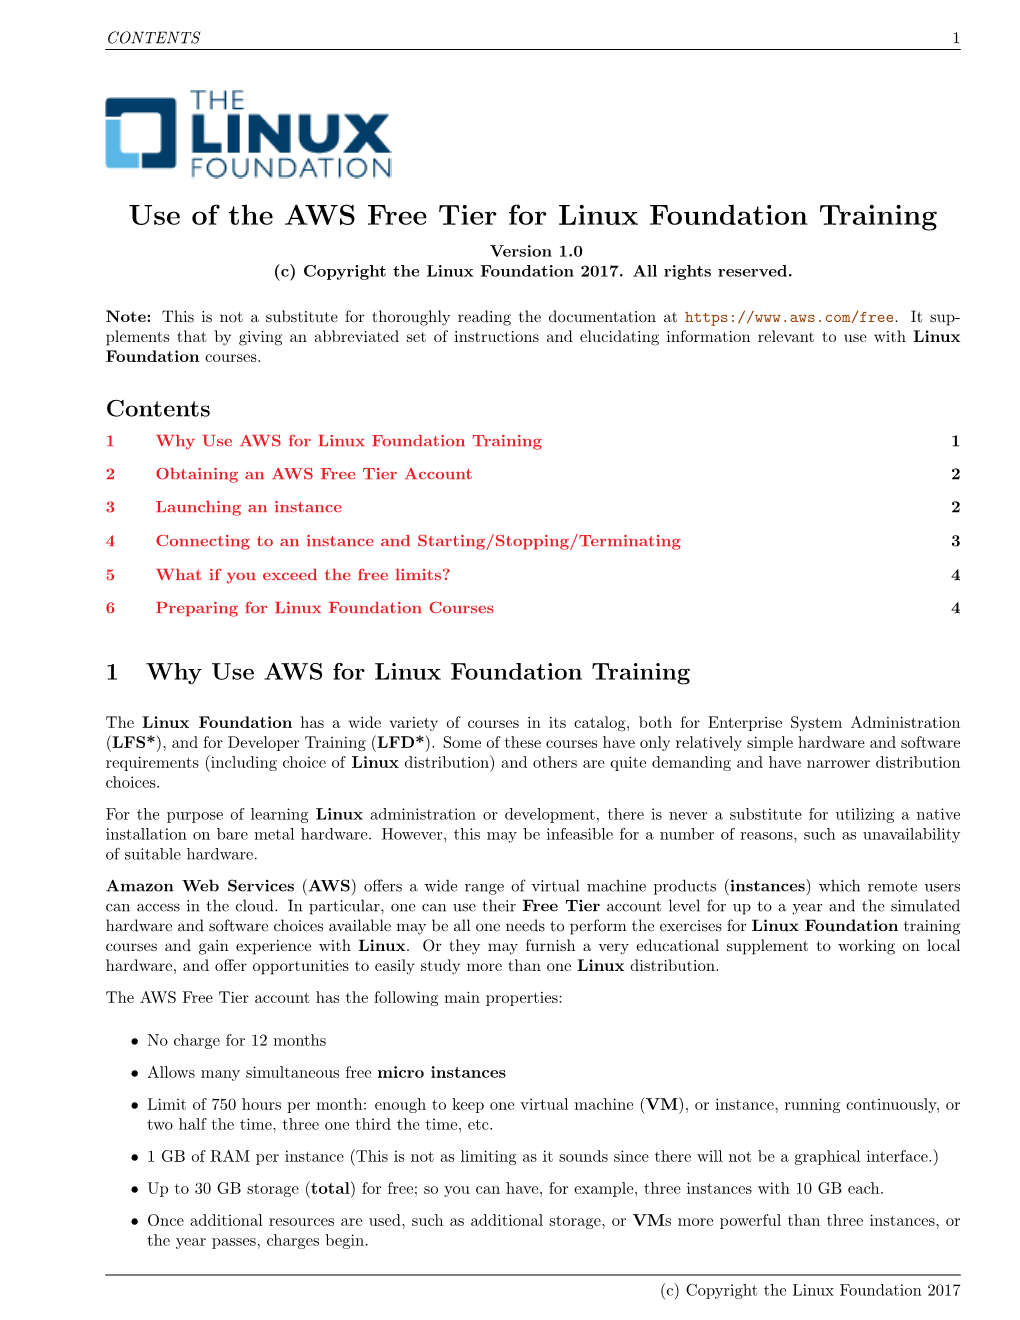 Use of the AWS Free Tier for Linux Foundation Training Version 1.0 (C) Copyright the Linux Foundation 2017